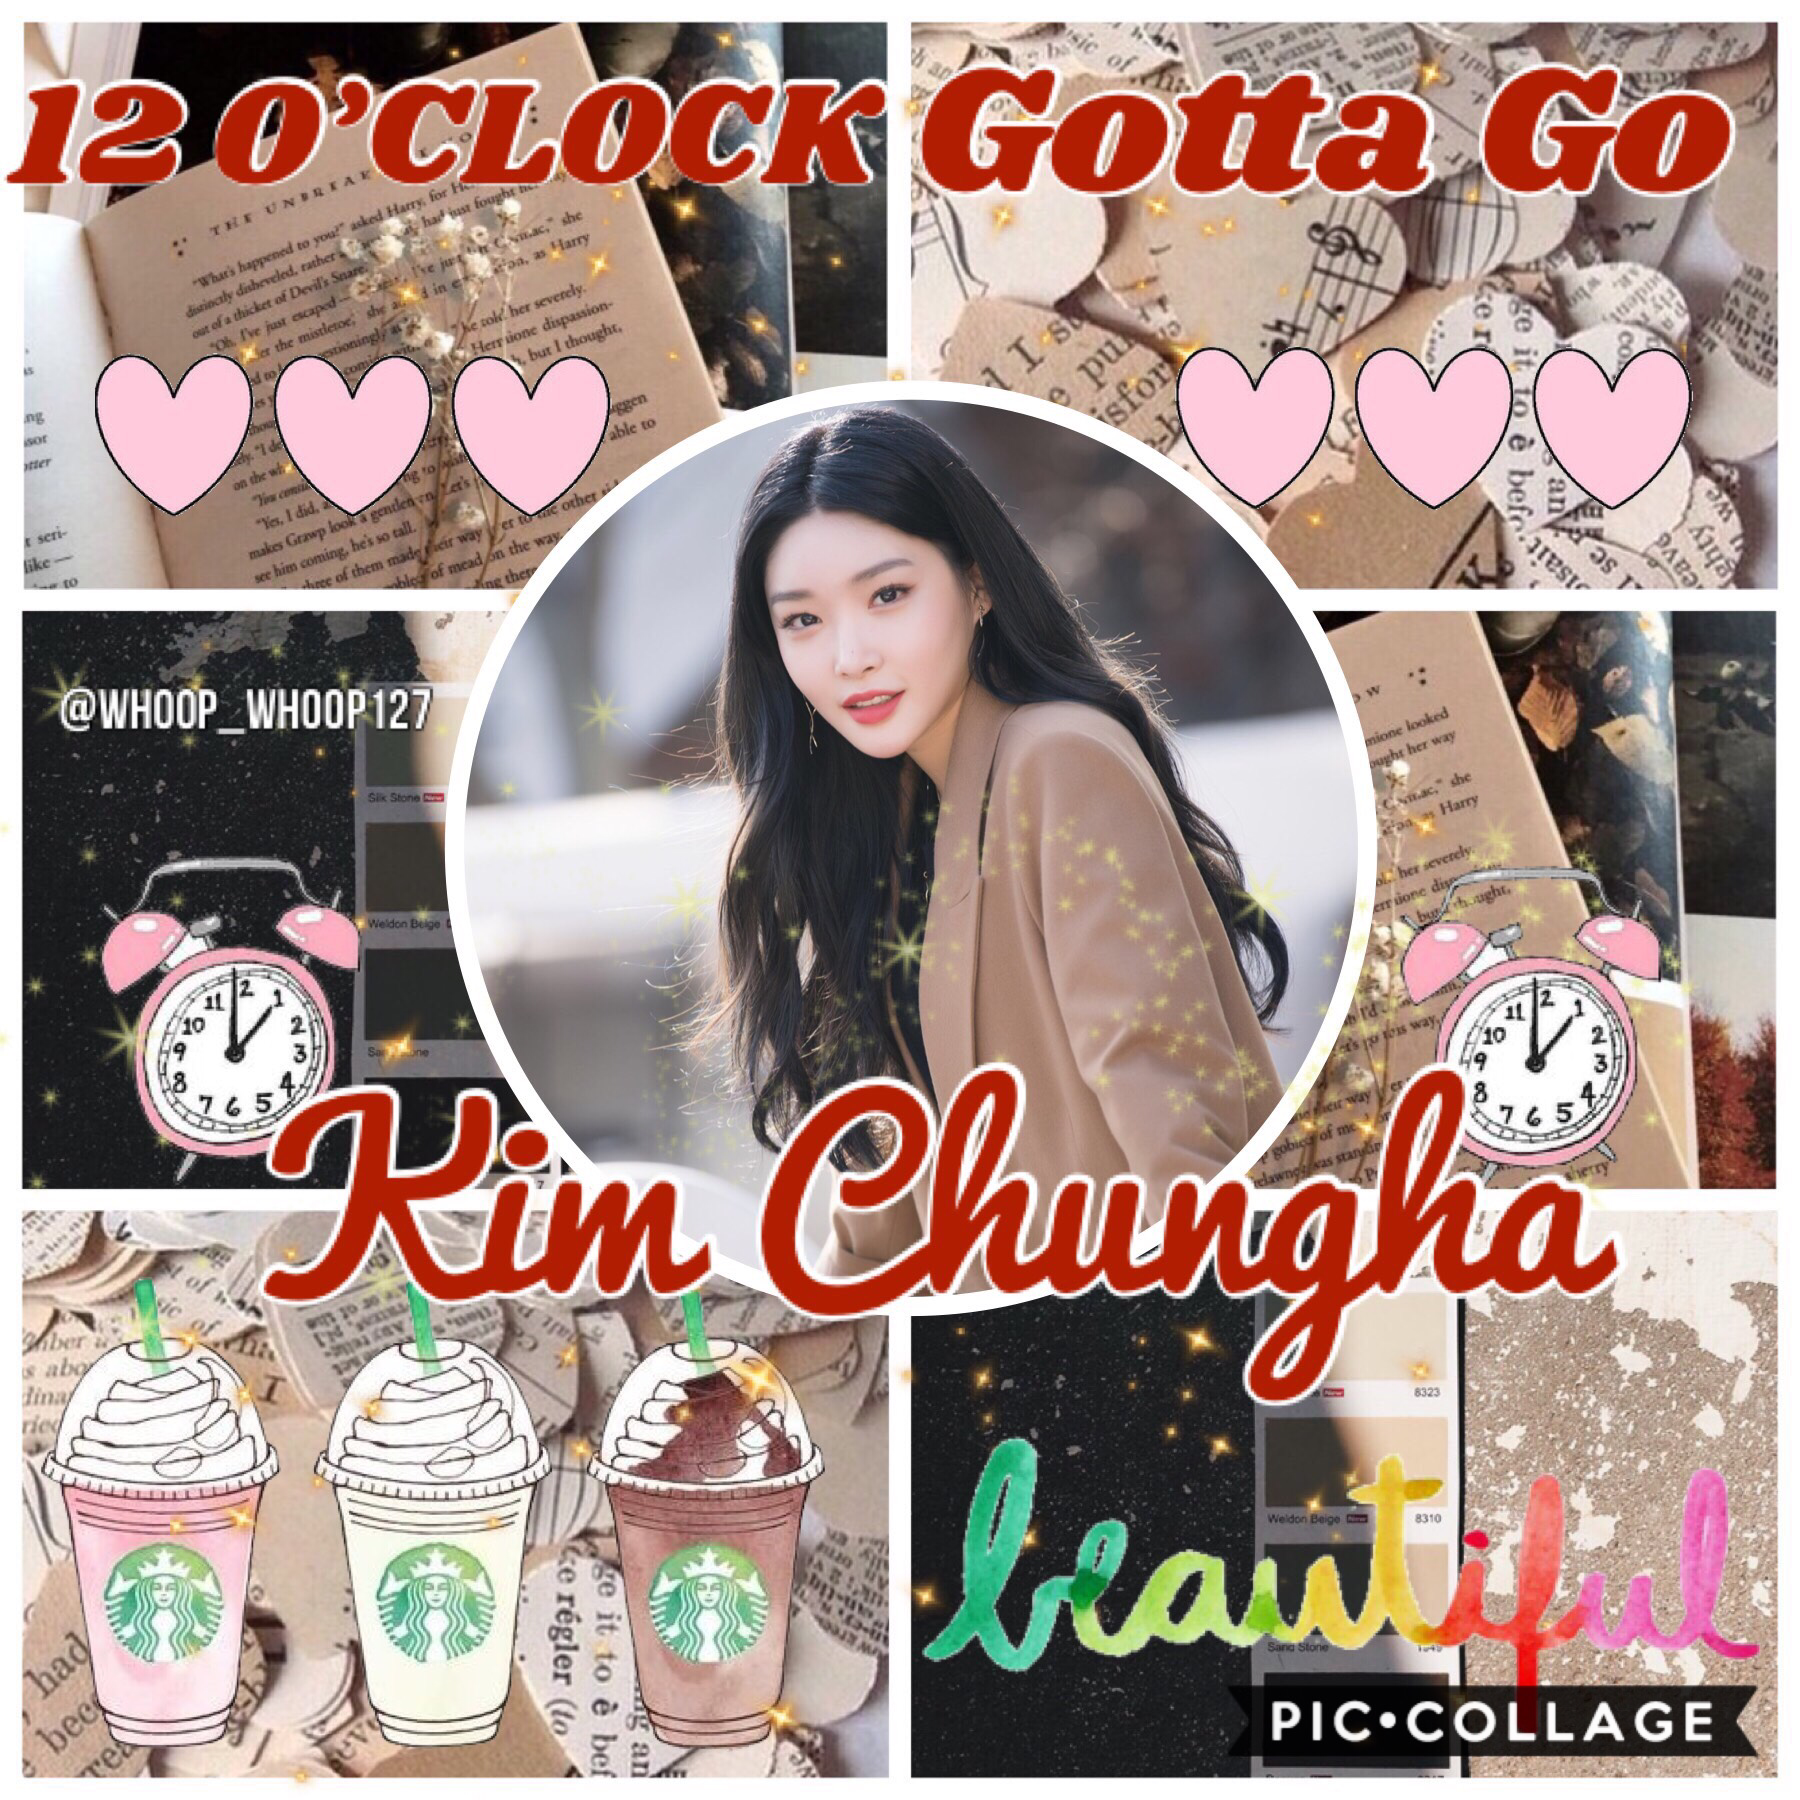 •🚒•
🌨Kim Chungha🌨
Gotta Go by Chungha is a major bop if you haven’t heard it you’ve been missing out GO LISTEN TO IT NOWWWWWWW

Chungha is the QUEEEEEEEN